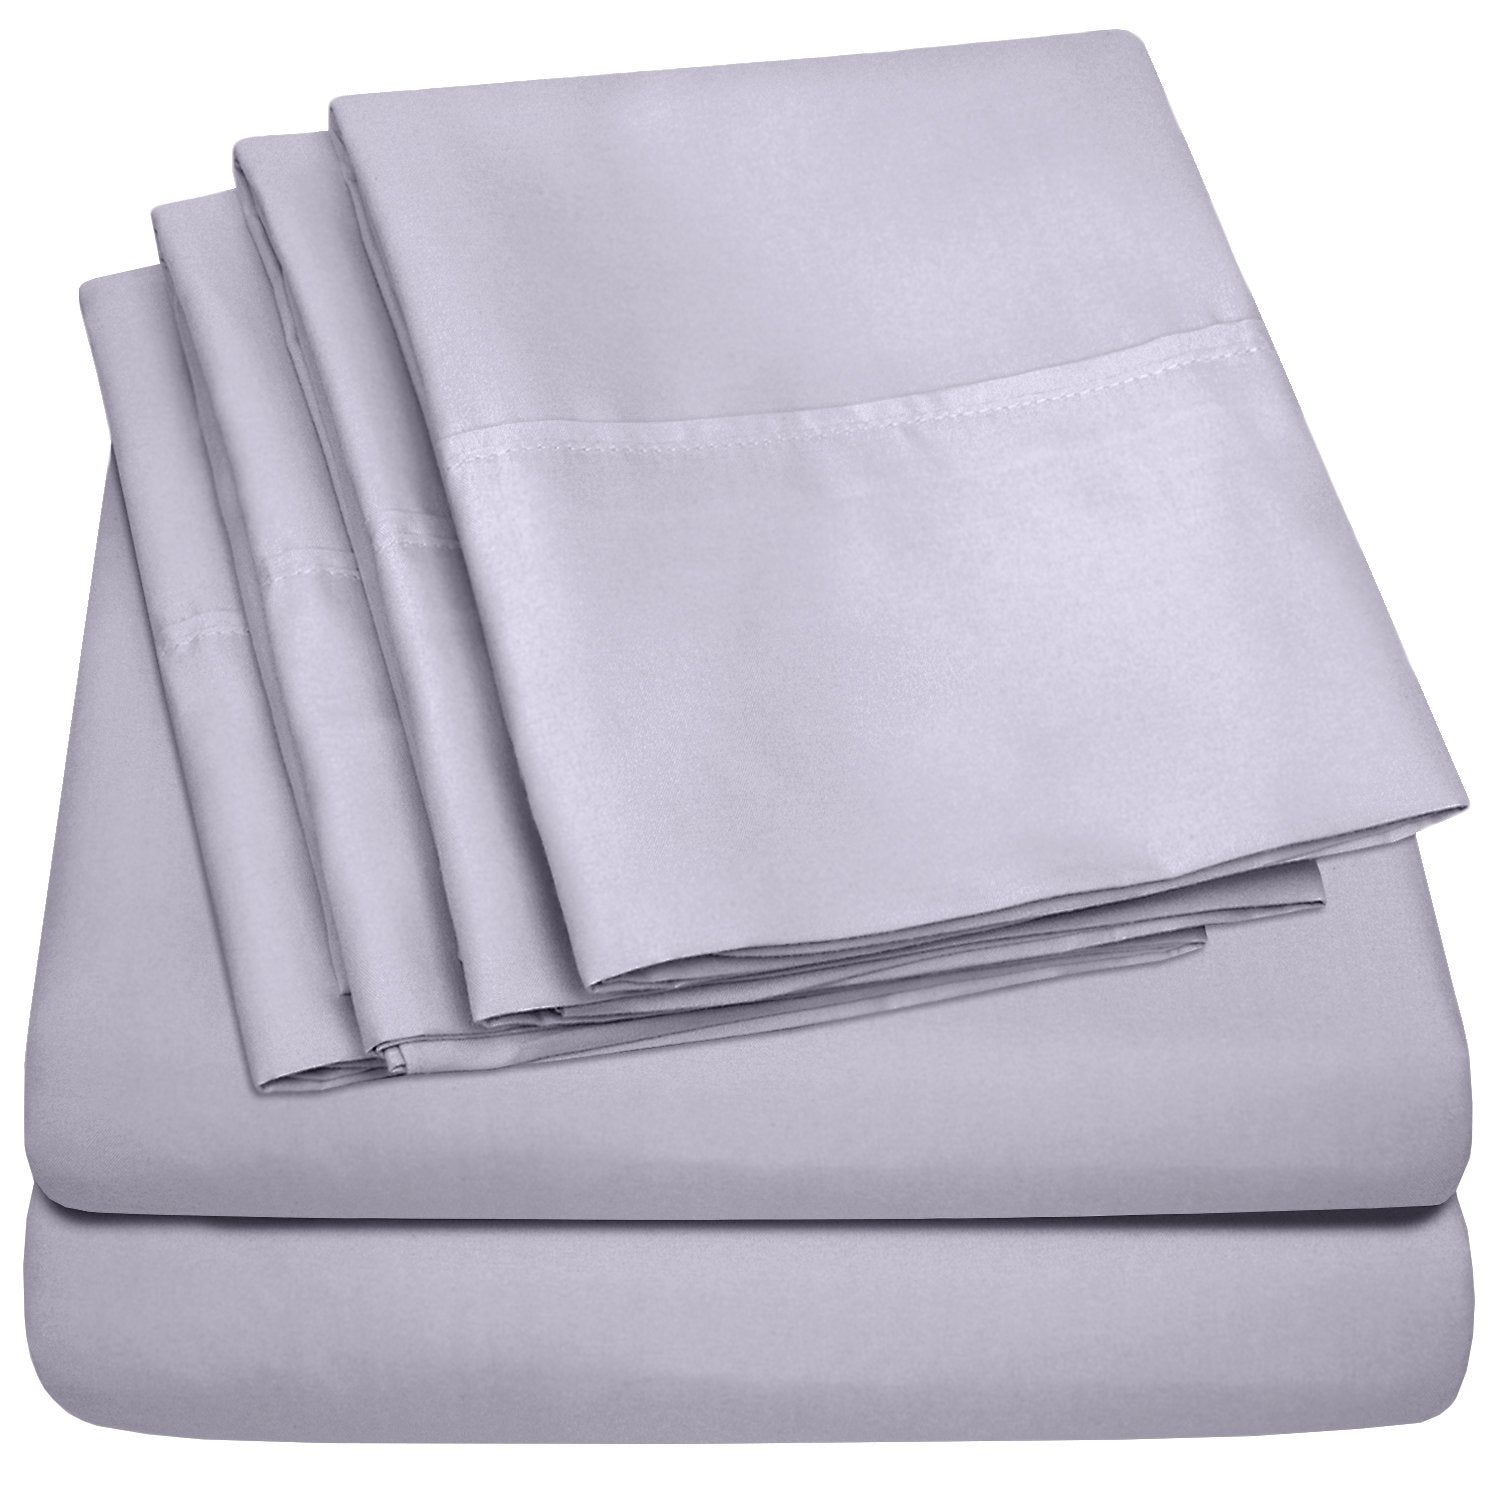 Deluxe 6-Piece Bed Sheet Set (Lilac) - Folded